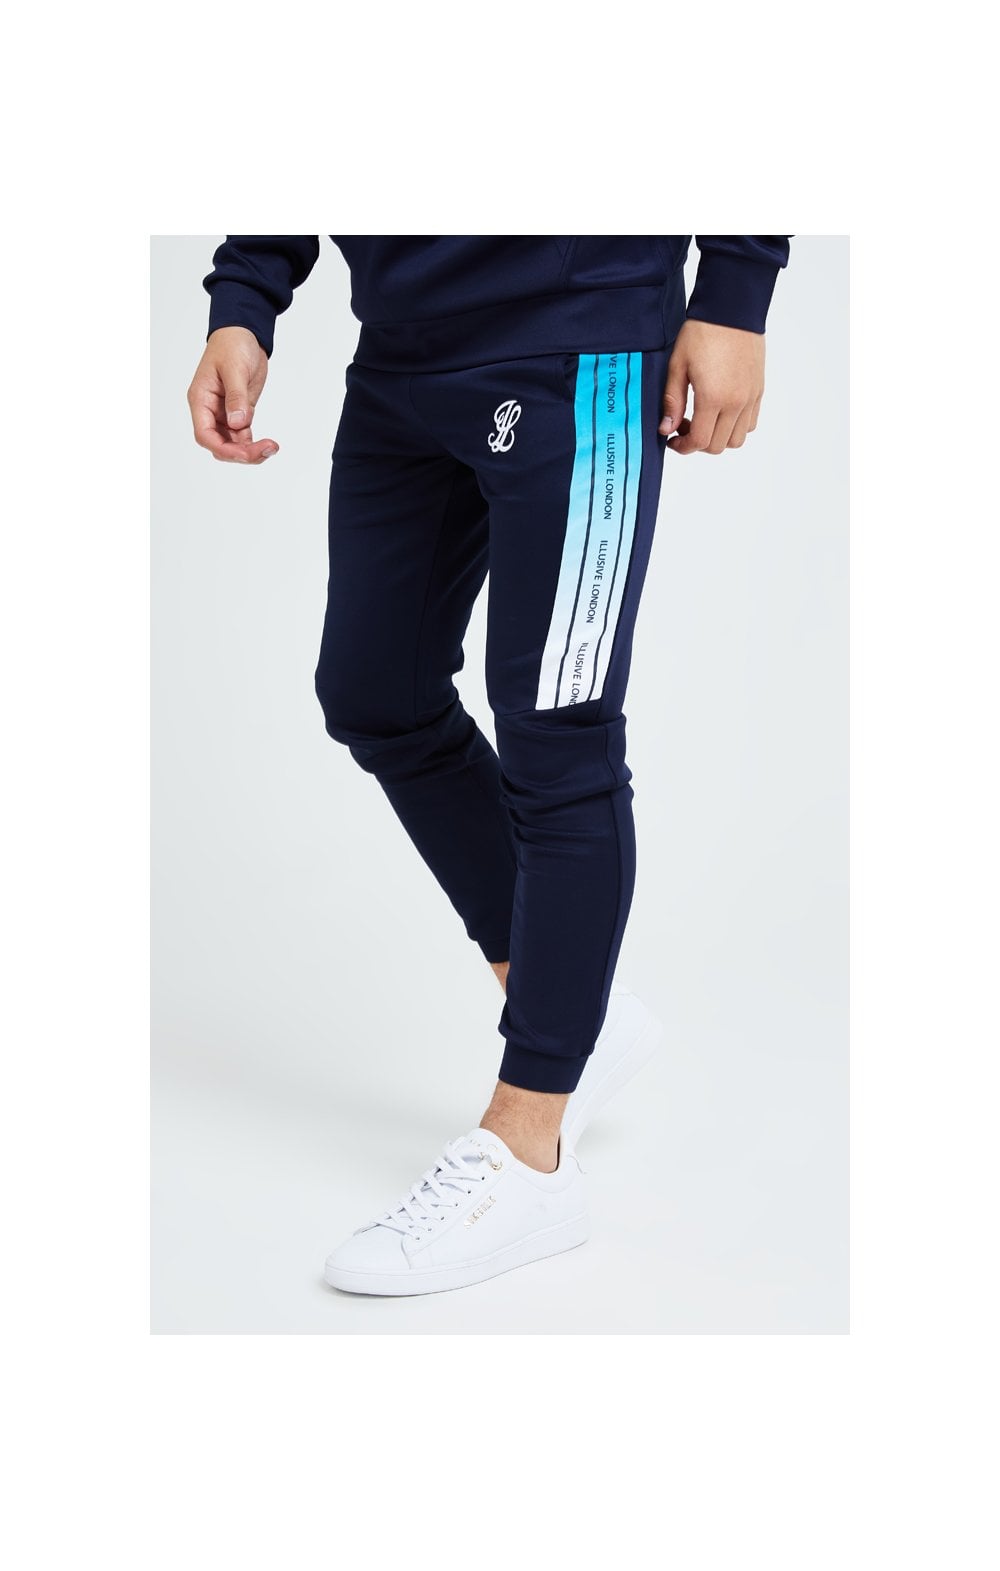 Illusive London Flux Taped Joggers - Navy &amp; Blue